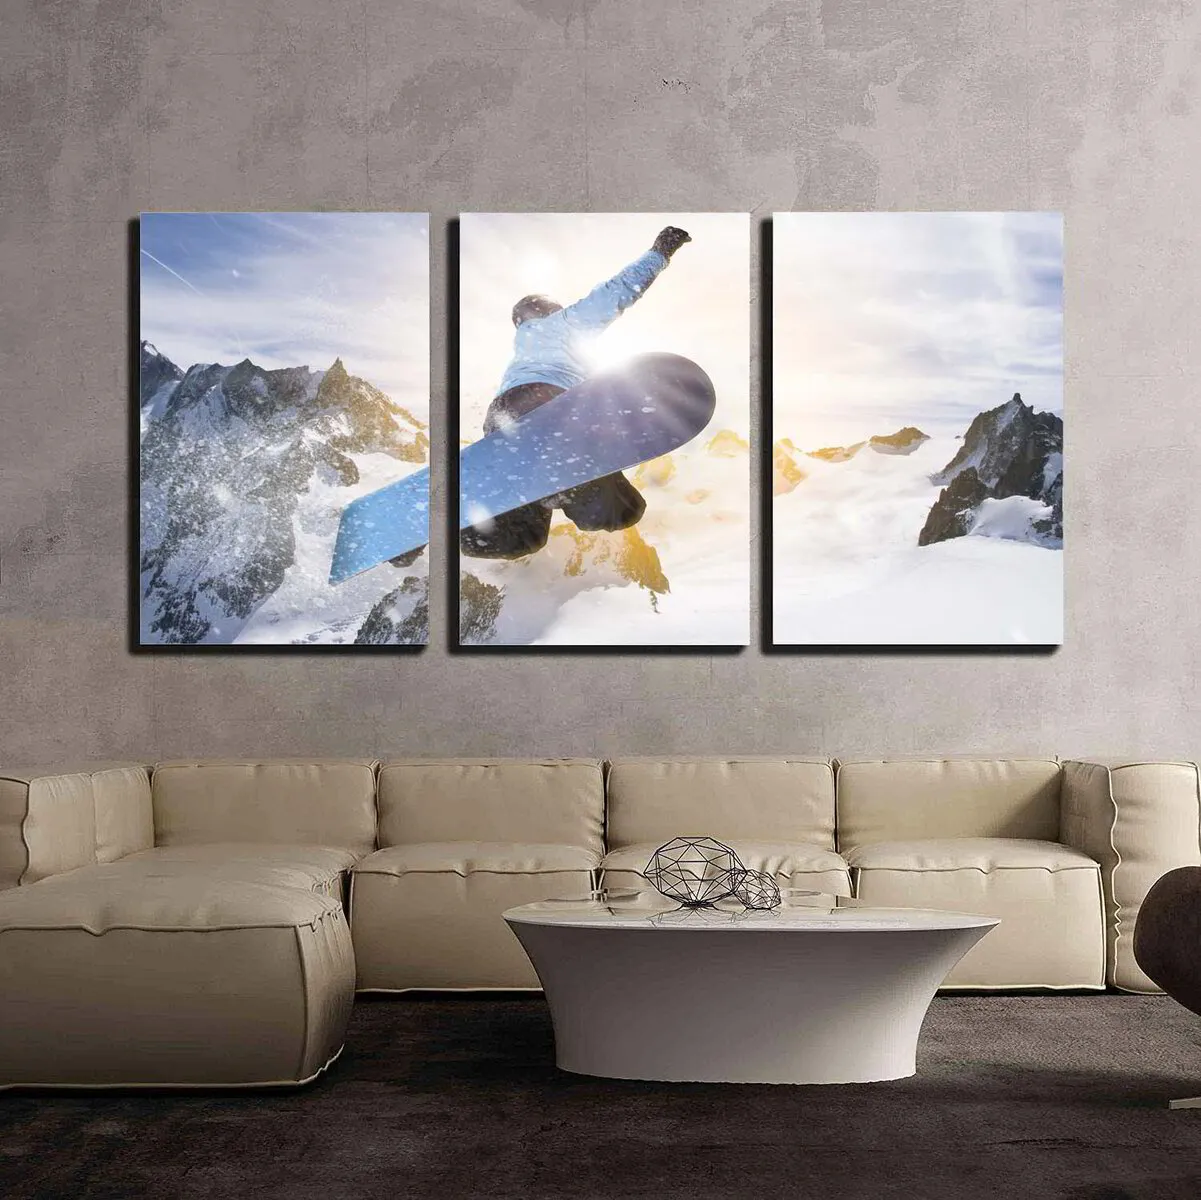 S3 Printed Acoustic Panels - Snowboarder Getting Air - 3 Panels